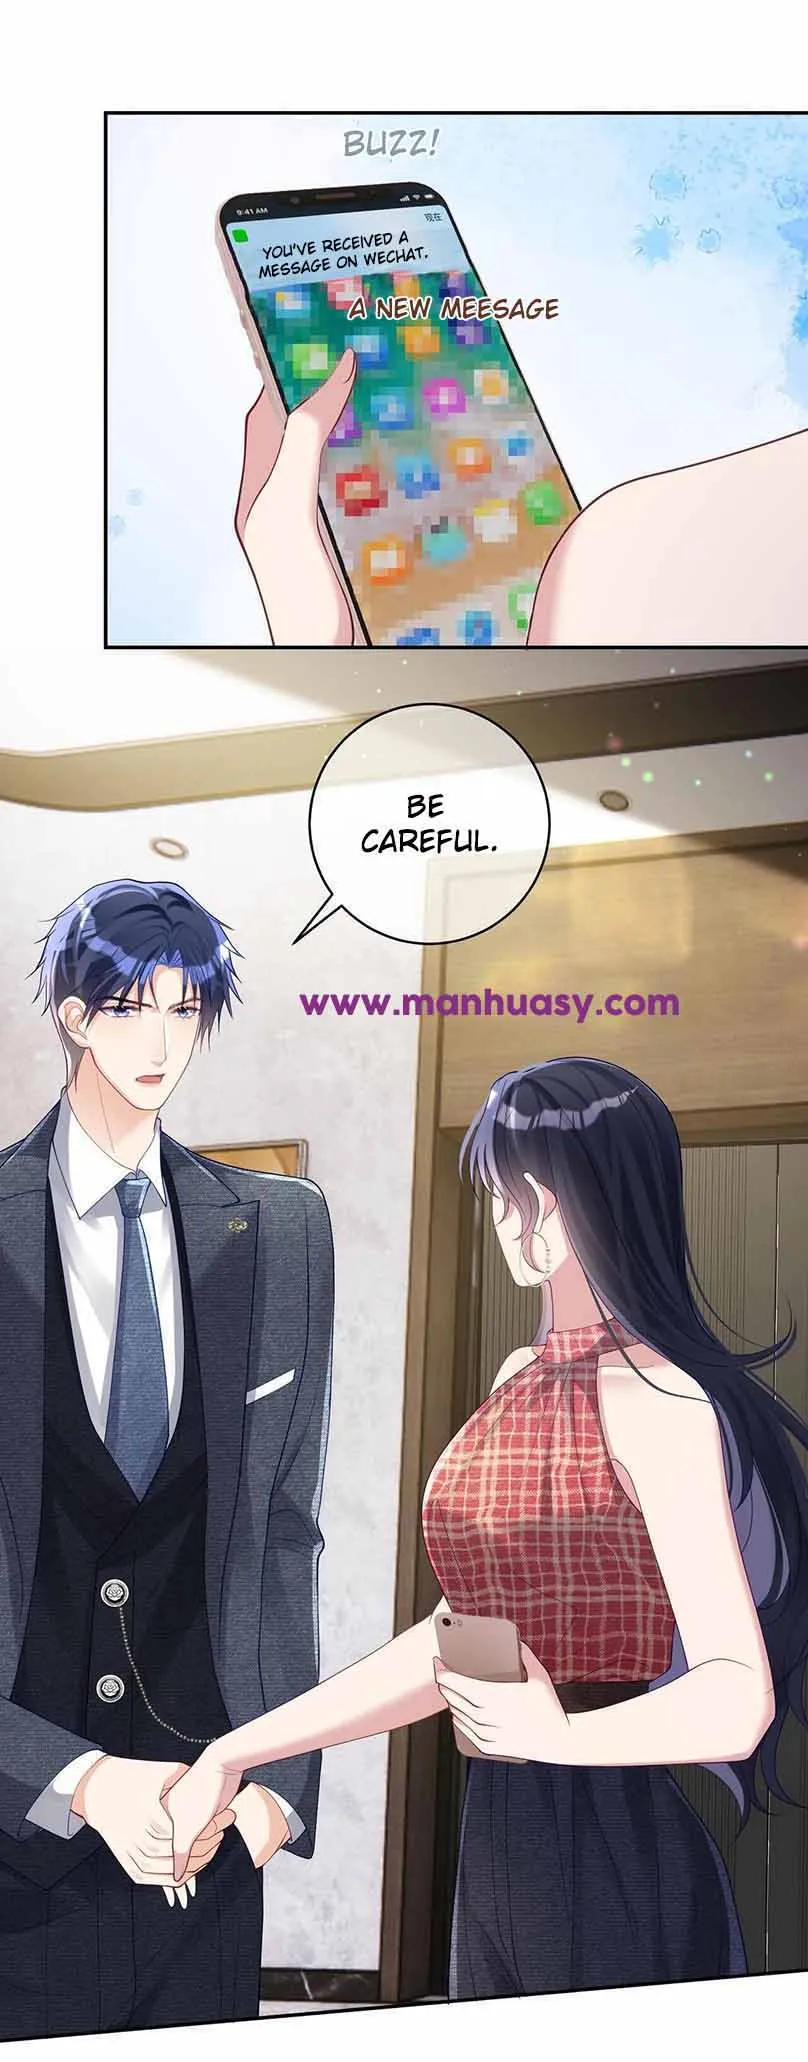 Cute Baby From Heaven: Daddy is Too Strong chapter 46